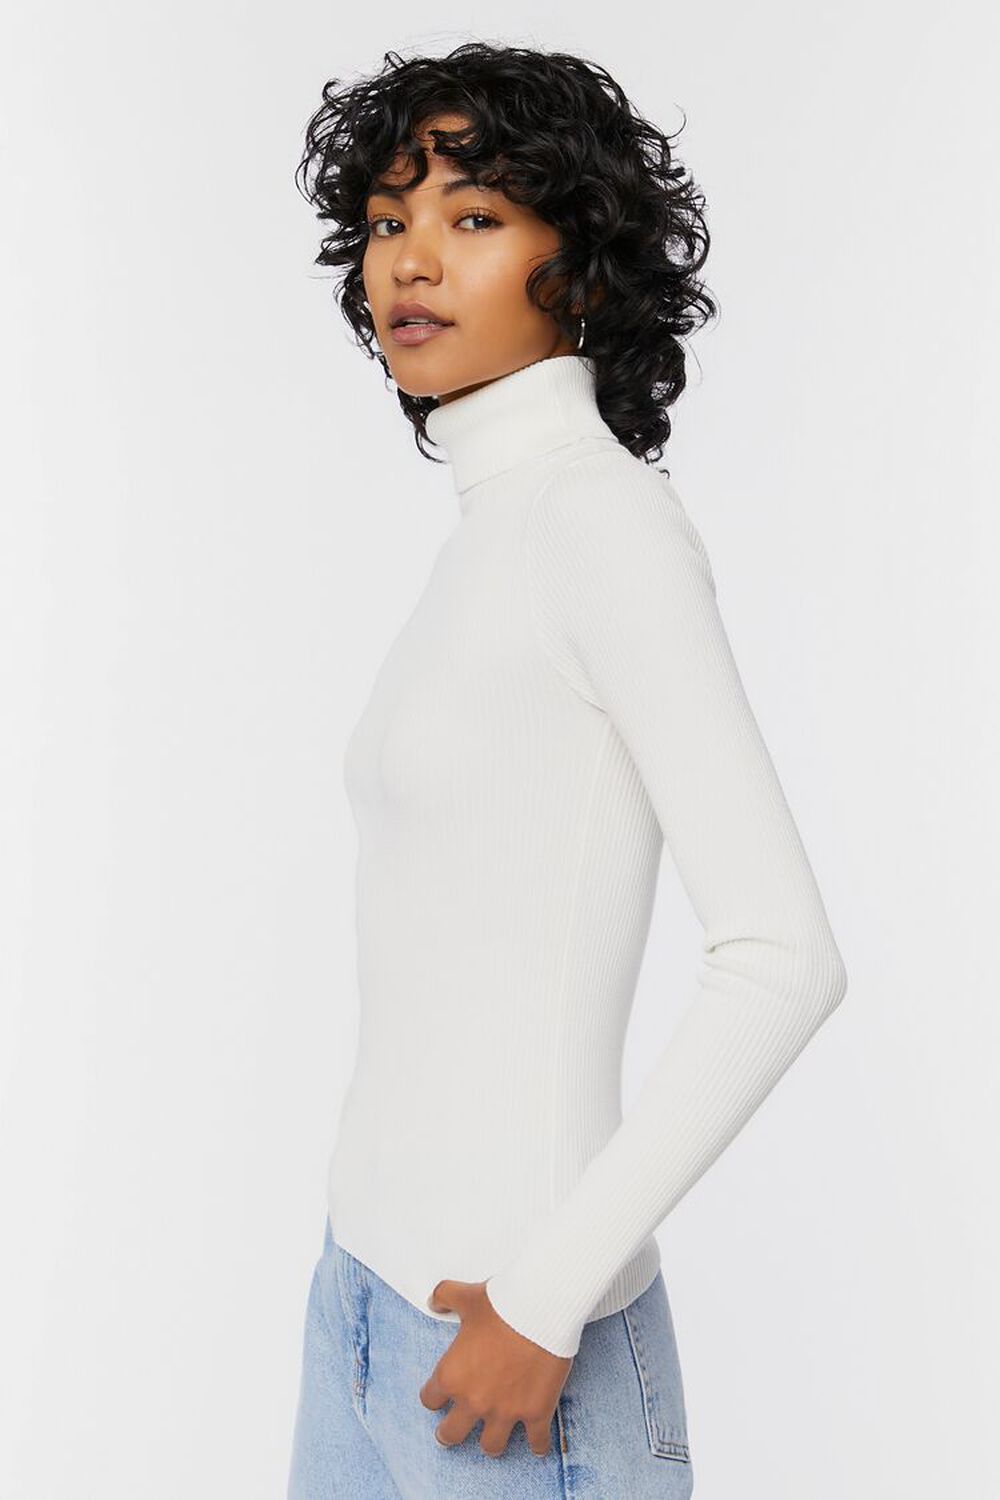 WHITE Ribbed Turtleneck Sweater-Knit Top, image 2